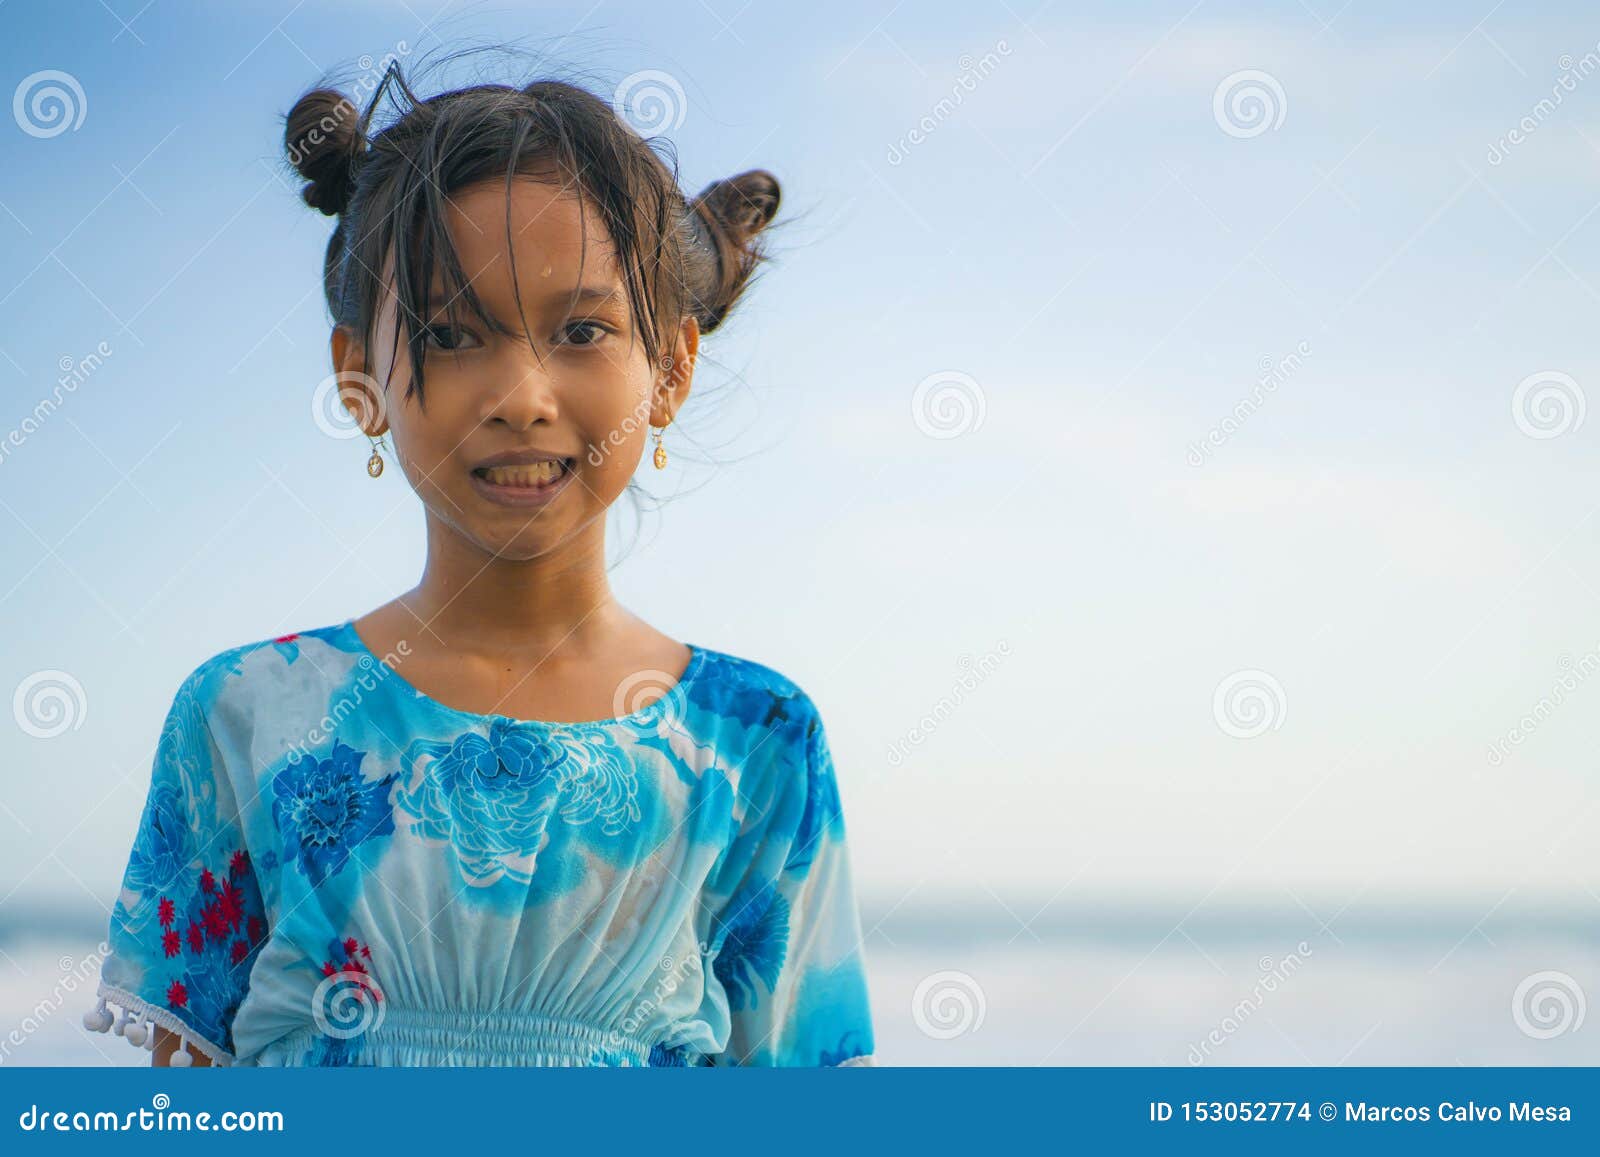 Beach Lifestyle Portrait of Young Beautiful and Happy Asian Child Girl 8 or  9 Years Old with Cute Double Buns Hair Style Playing Stock Photo - Image of  lifestyle, holidays: 153052774